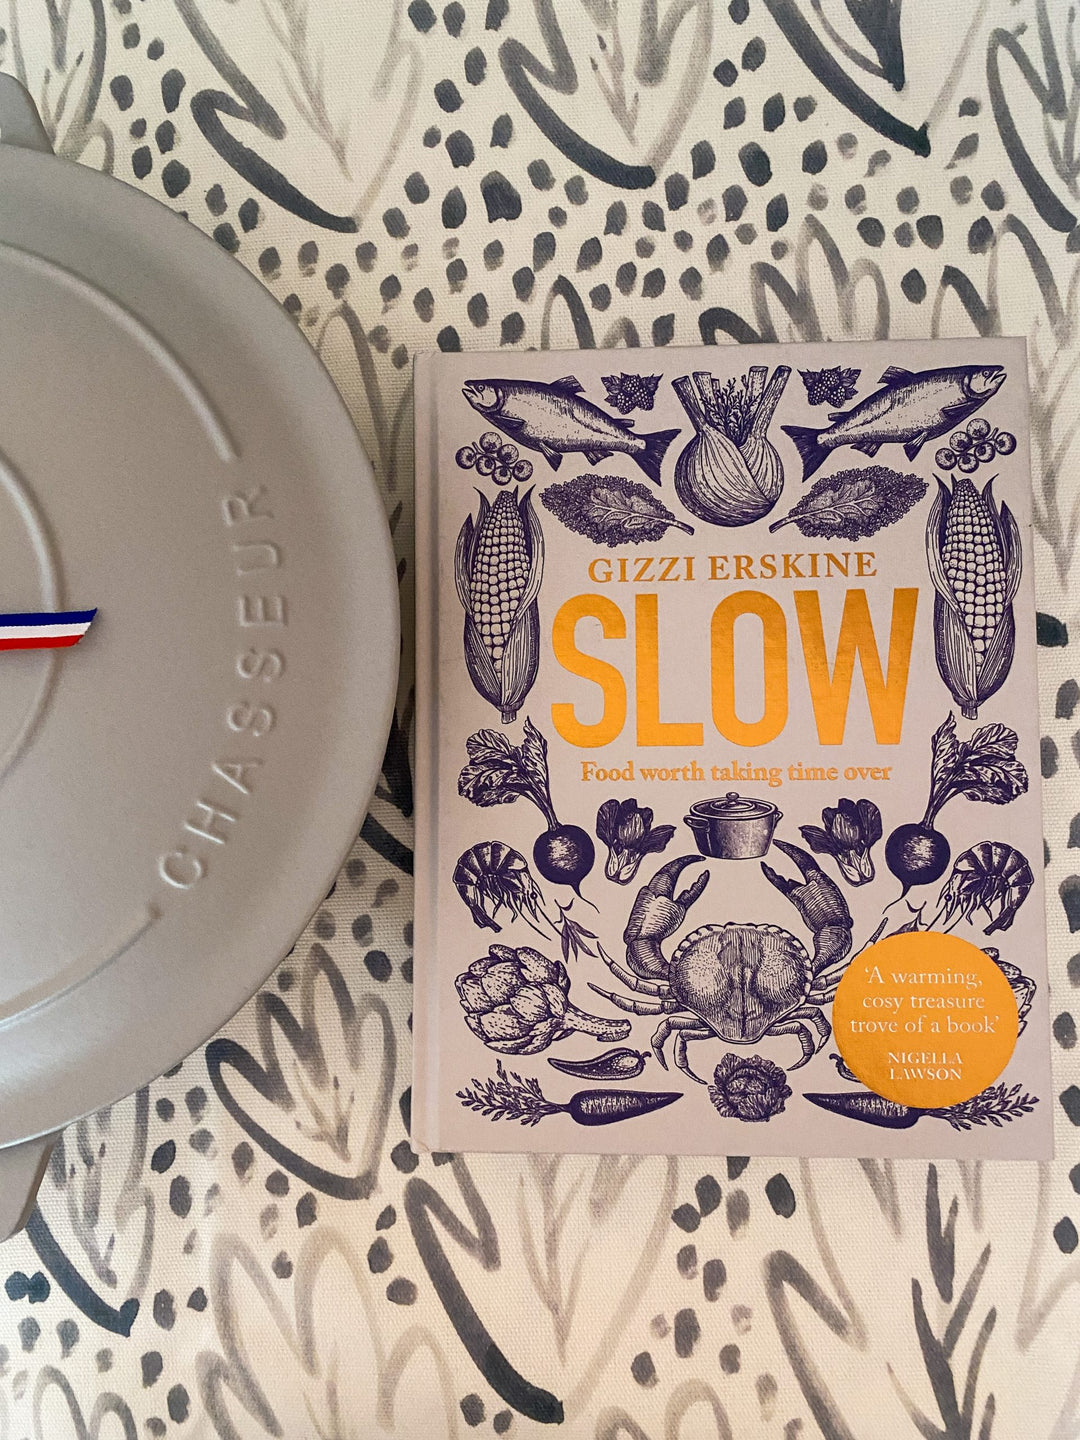 Slow: Food Worth Taking Time Over - Lucy Bowman